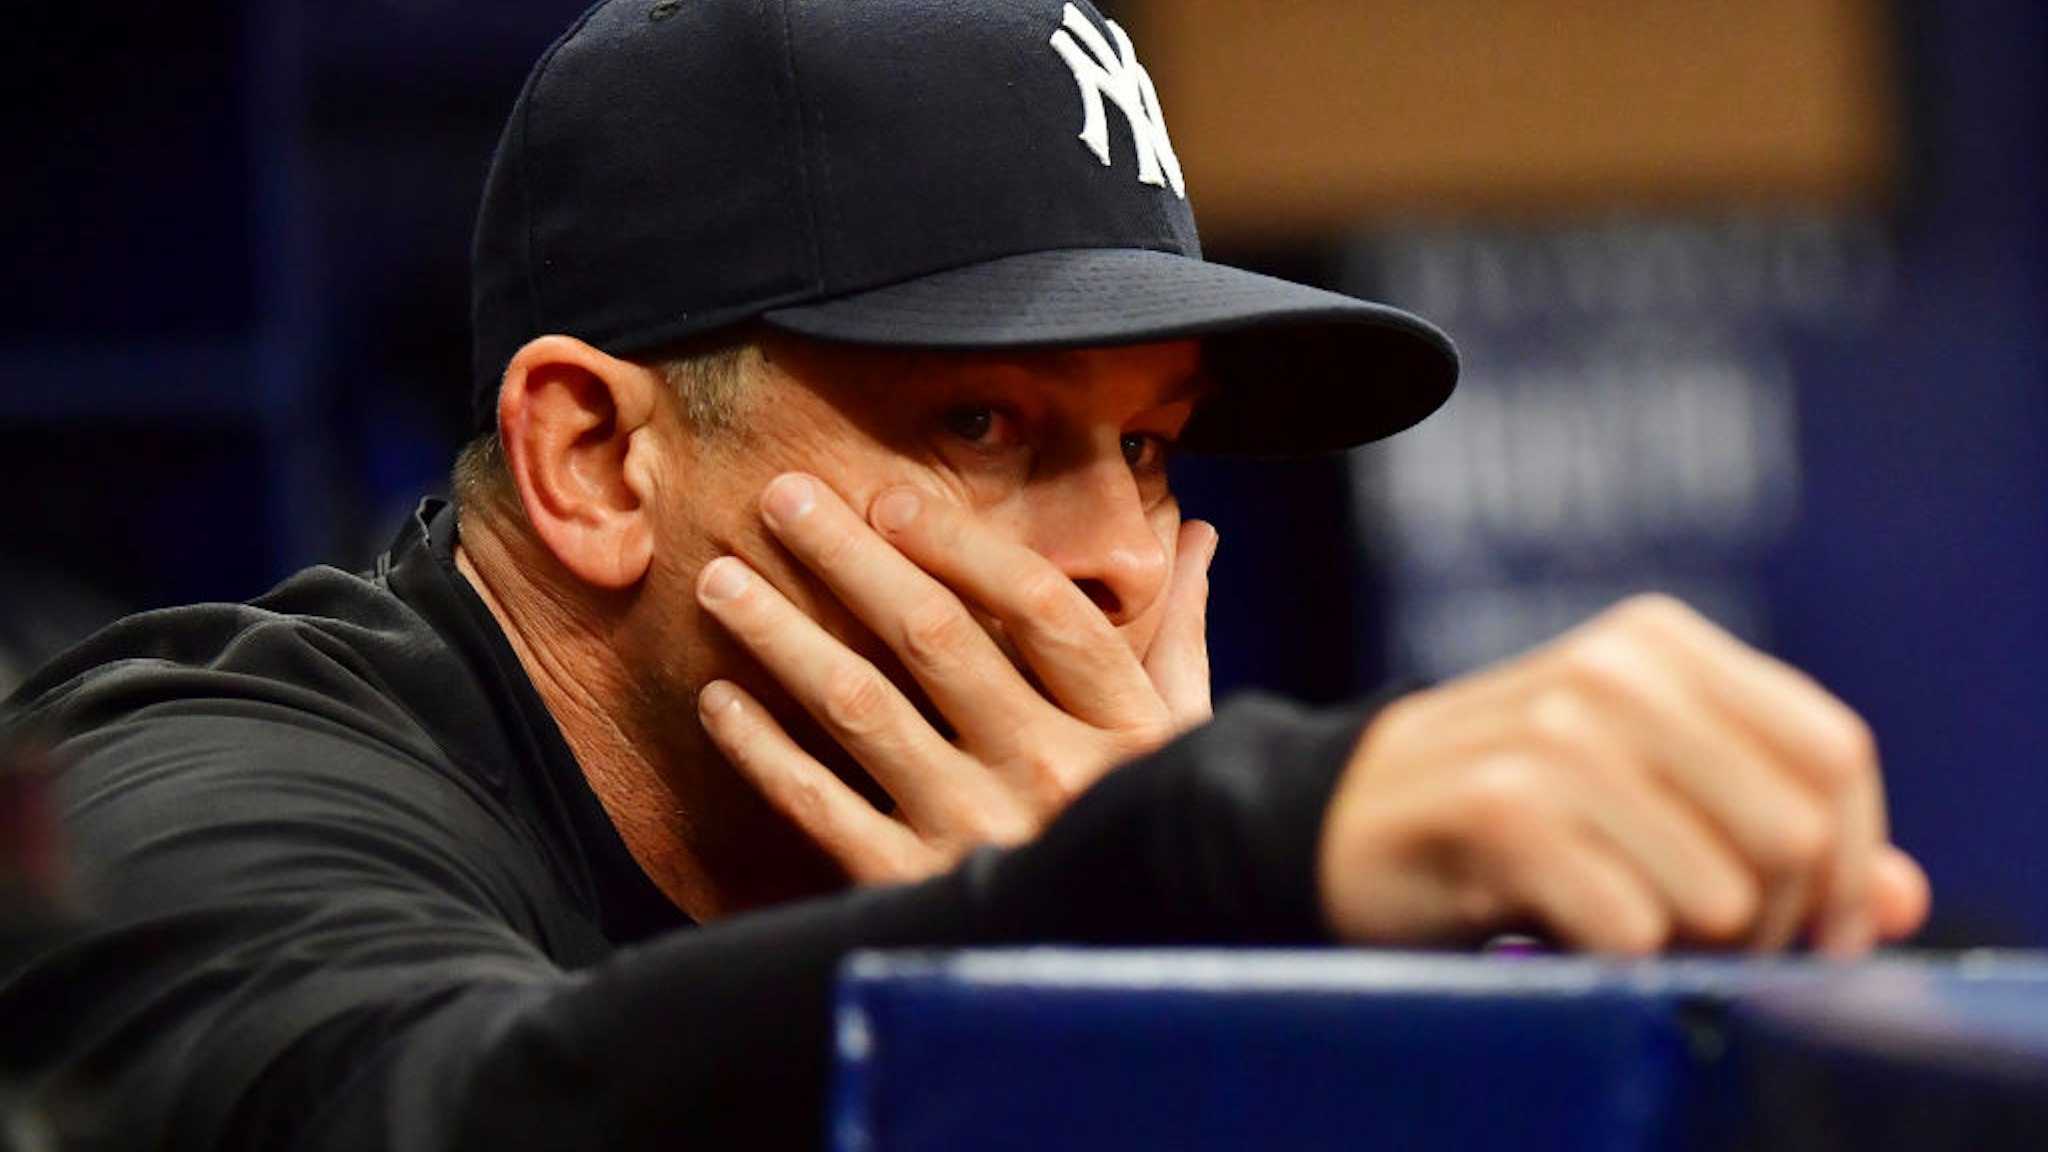 ST PETERSBURG, FLORIDA - JULY 29: Manager Aaron Boone #17 of the New York Yankees looks on during the ninth inning against the Tampa Bay Rays at Tropicana Field on July 29, 2021 in St Petersburg, Florida. (Photo by Julio Aguilar/Getty Images)